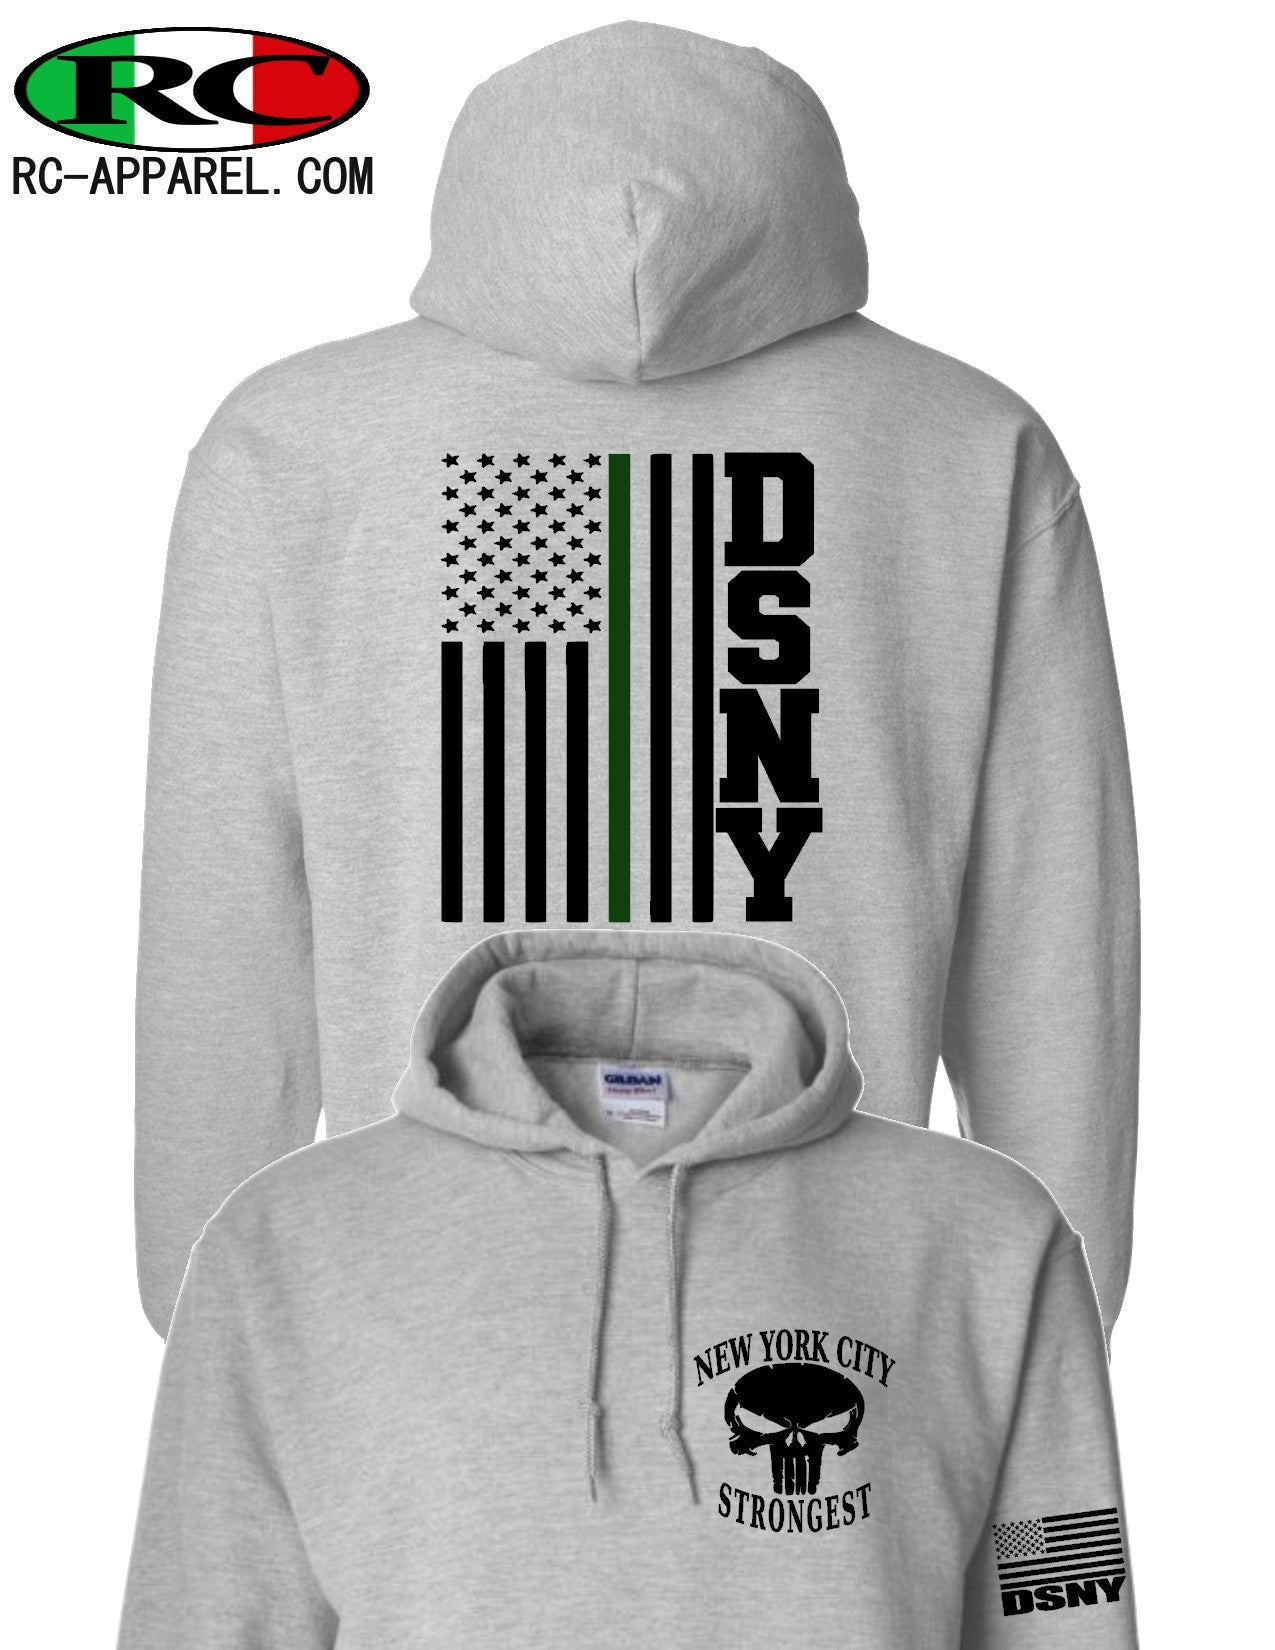 SA Company Inner Lined Hoodie | Blackout American Flag | Size L